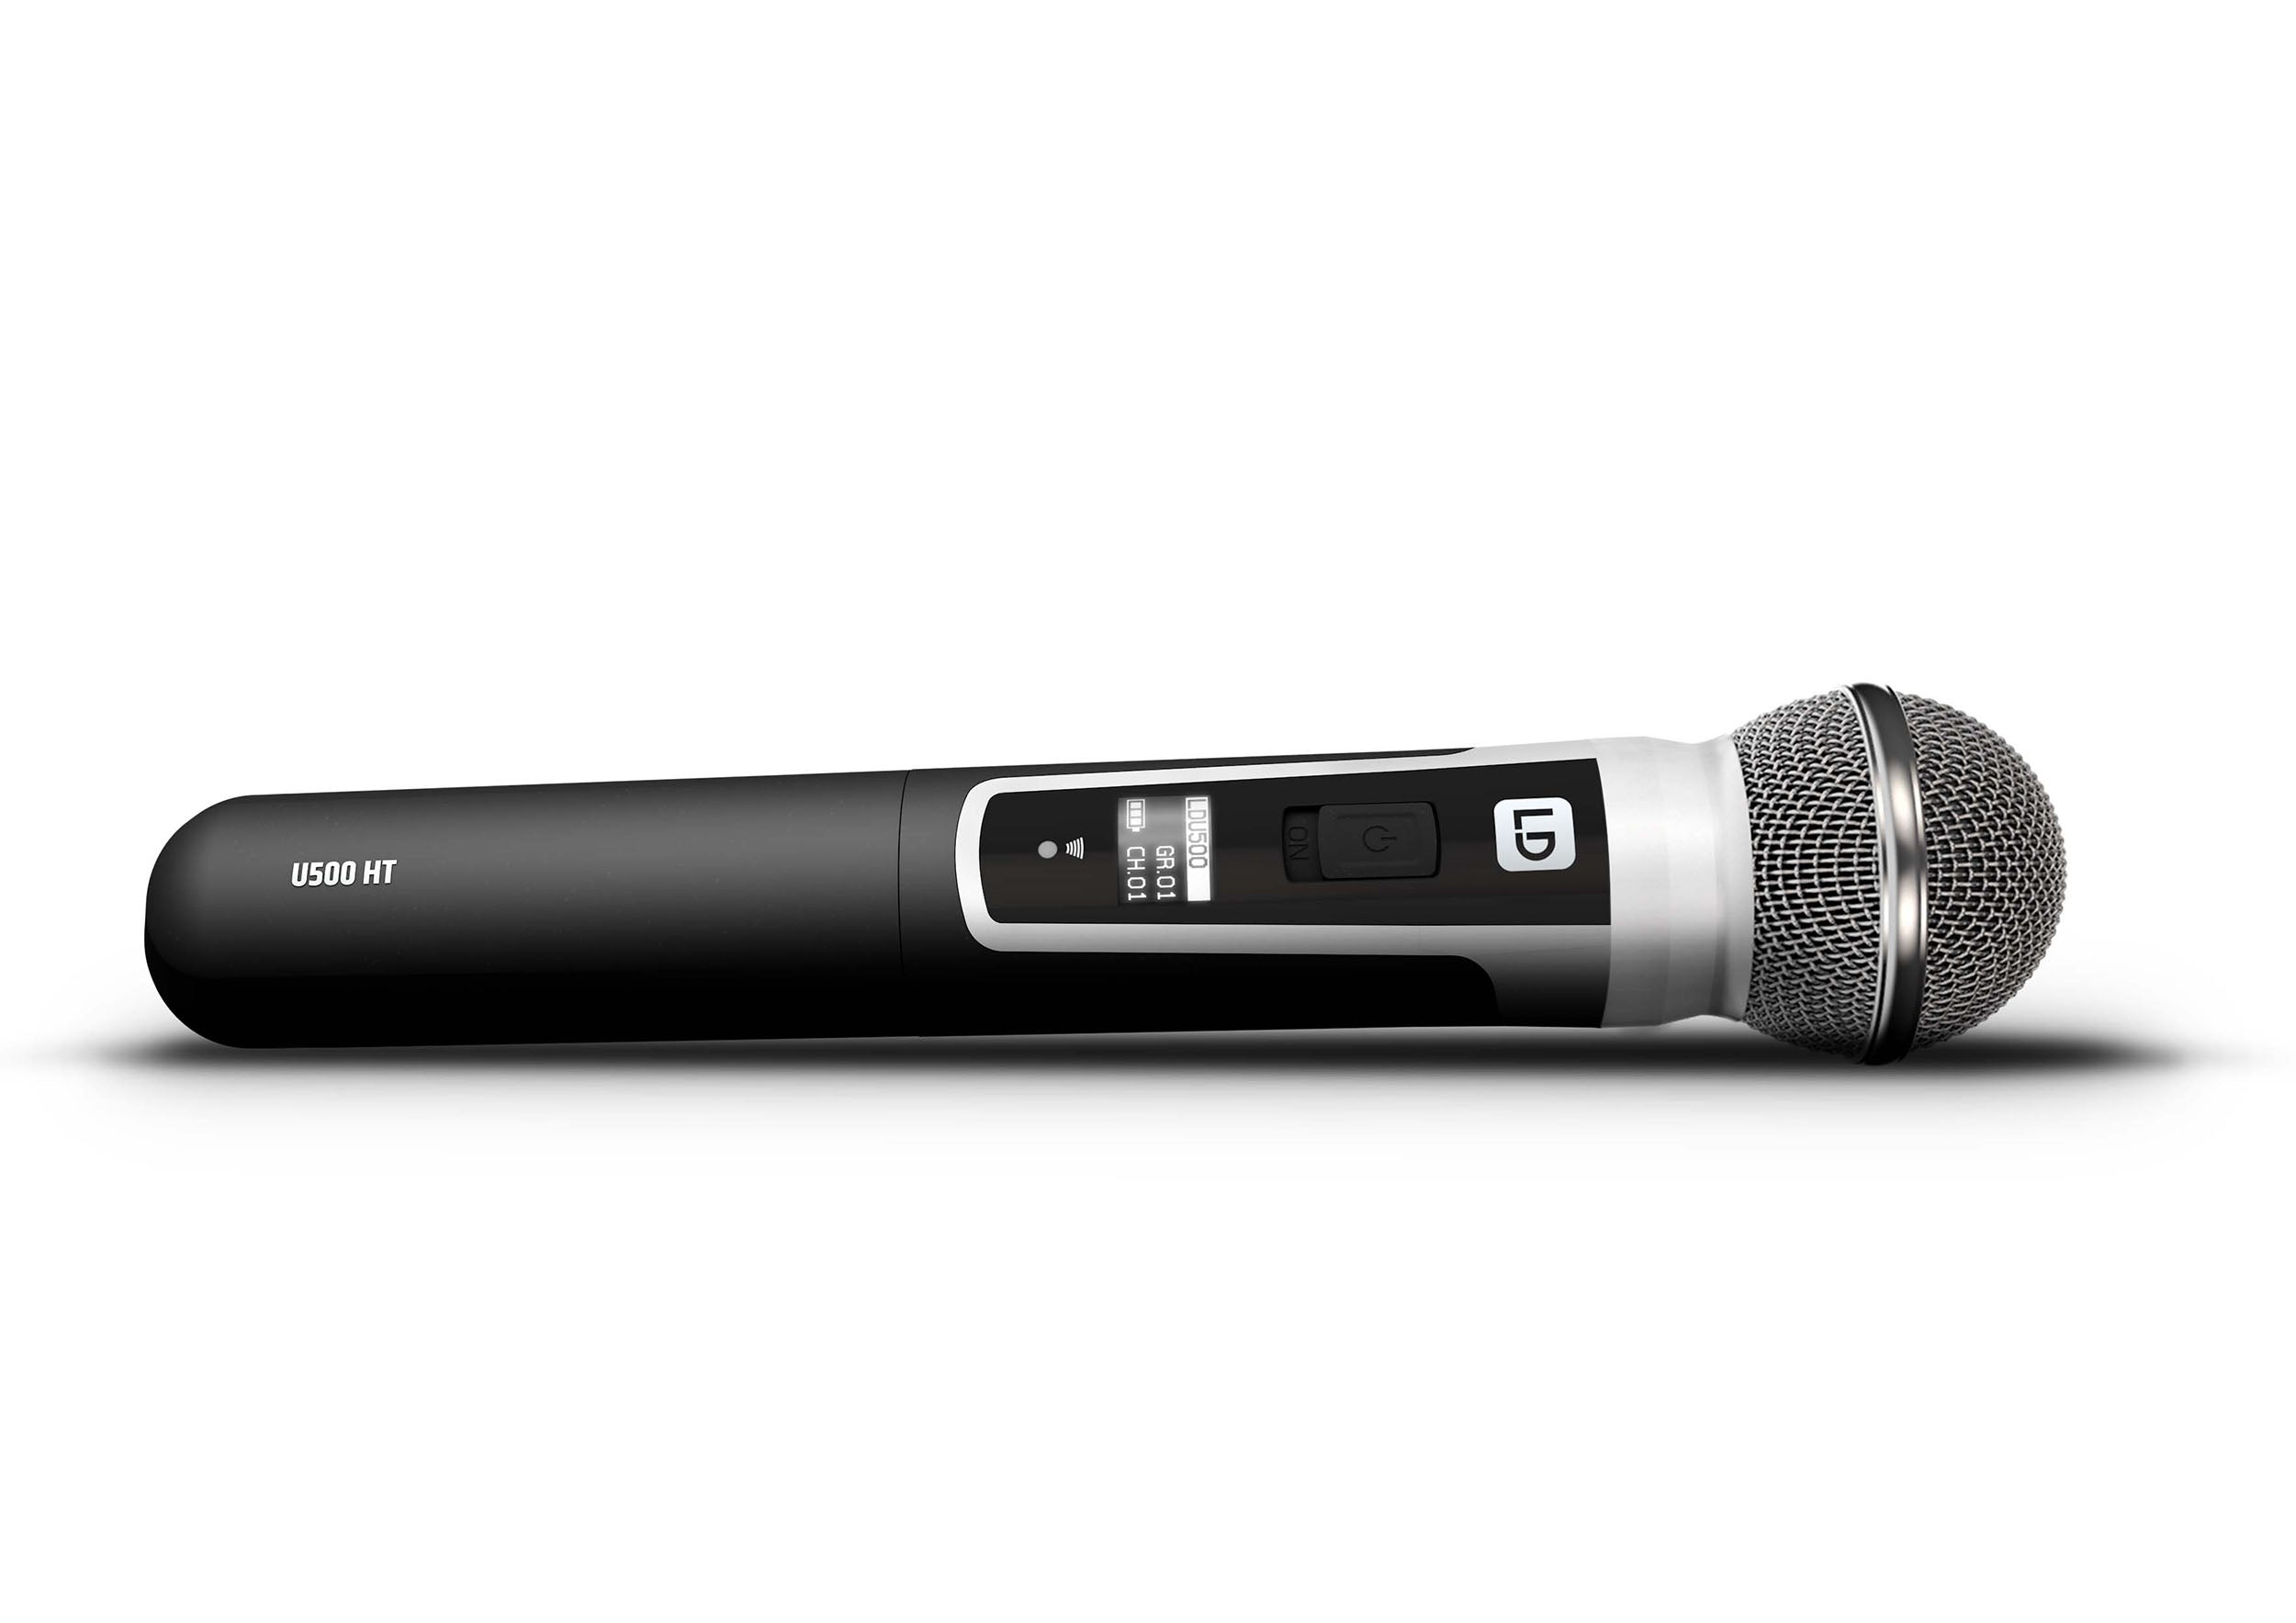 LD Systems U505.1 HHD US, Wireless Microphone System with Dynamic Handheld Microphone - 512-542 MHz by LD Systems